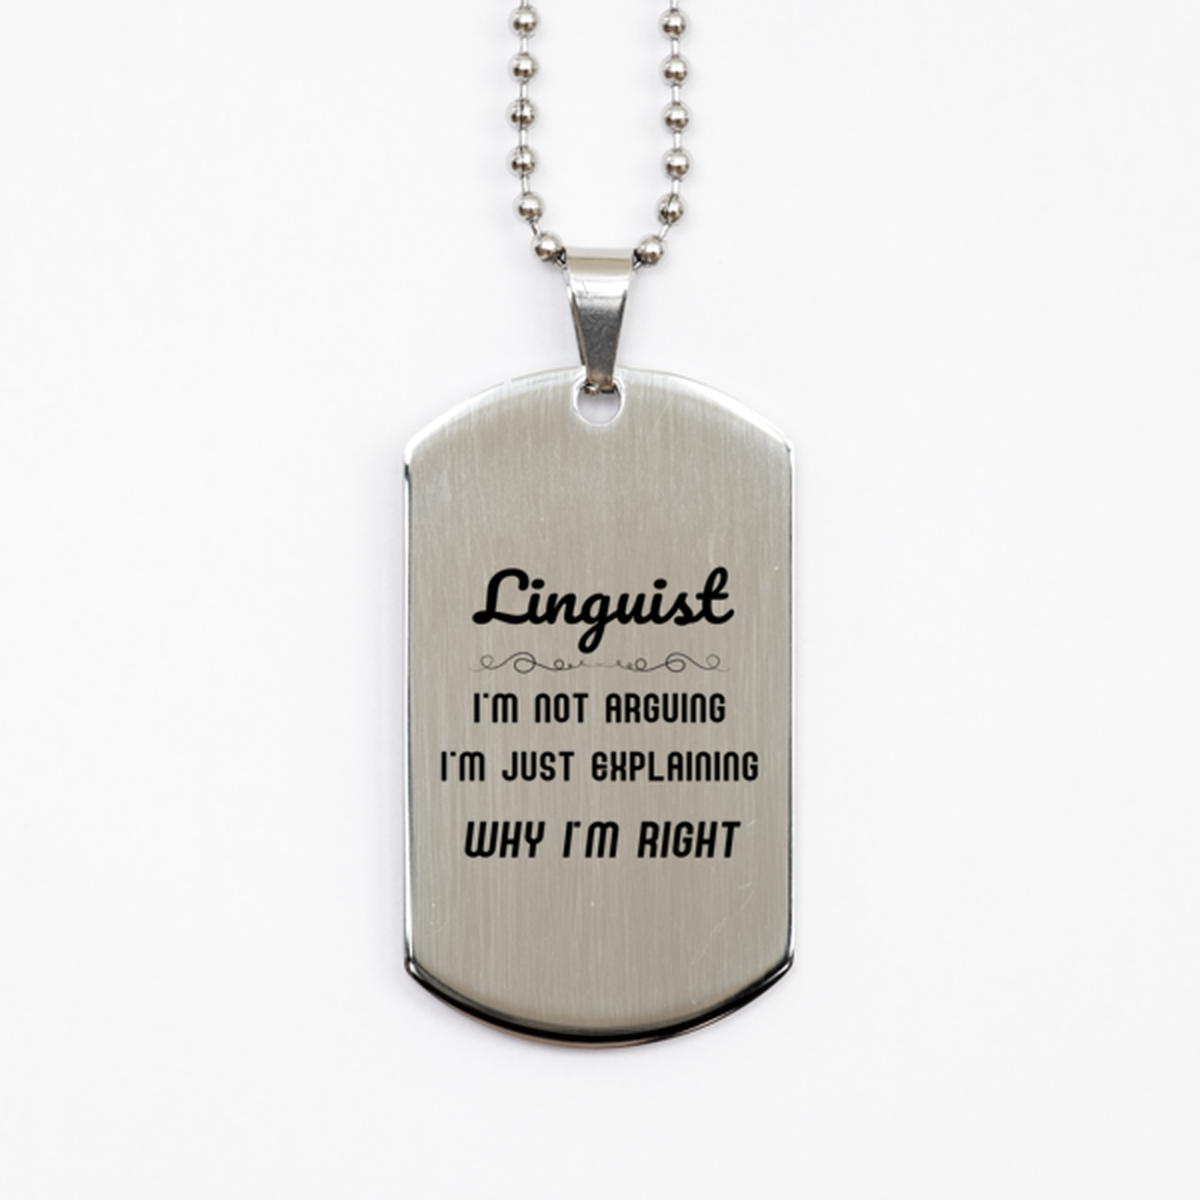 Linguist I'm not Arguing. I'm Just Explaining Why I'm RIGHT Silver Dog Tag, Funny Saying Quote Linguist Gifts For Linguist Graduation Birthday Christmas Gifts for Men Women Coworker